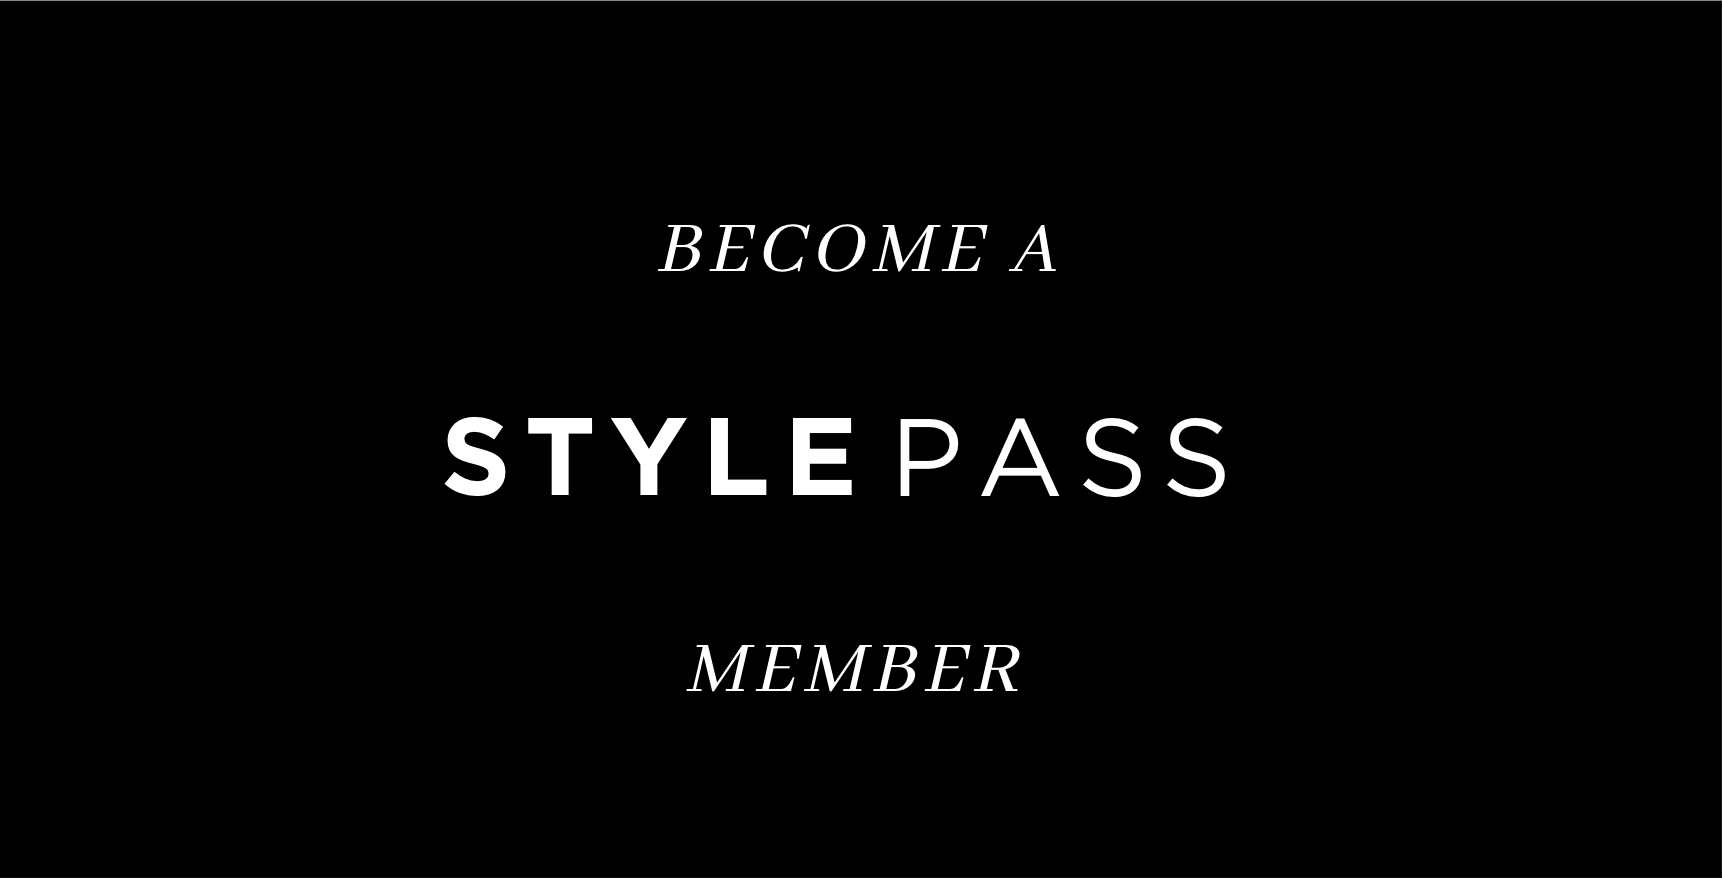 Sign up for StylePass